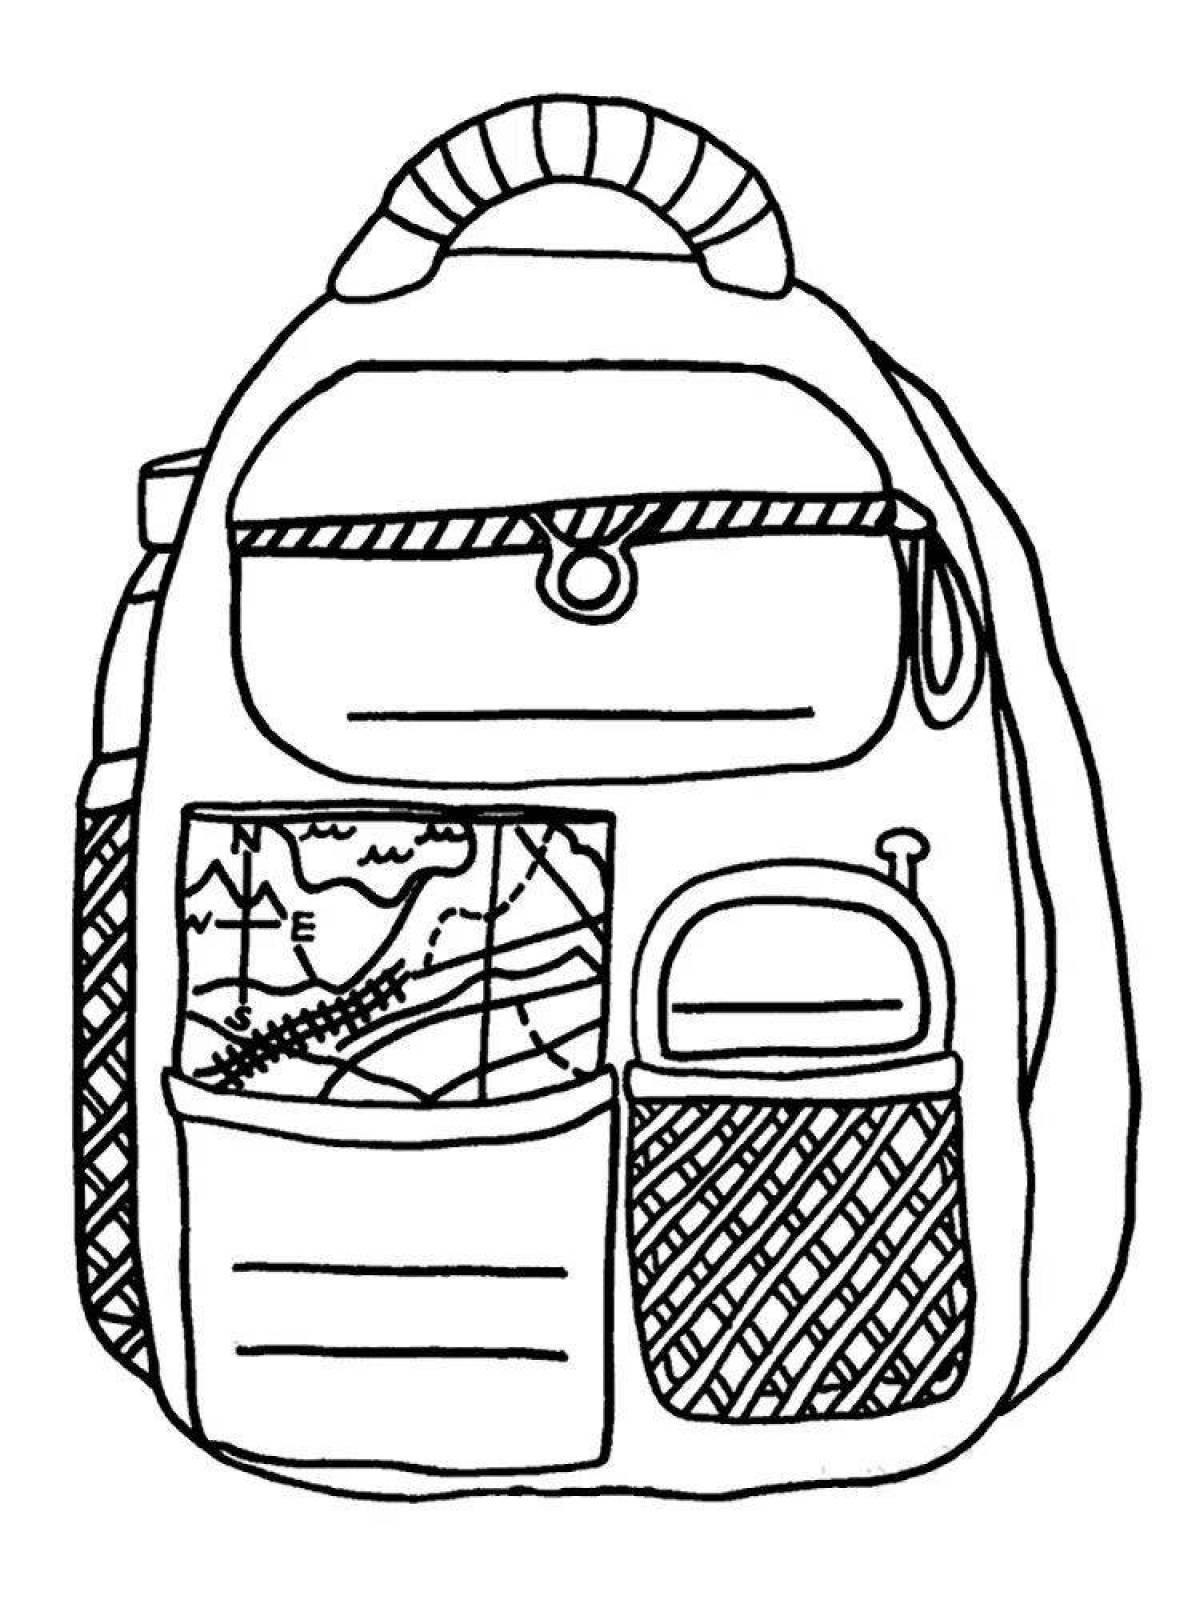 Colorful fairy tale backpack coloring book for kids